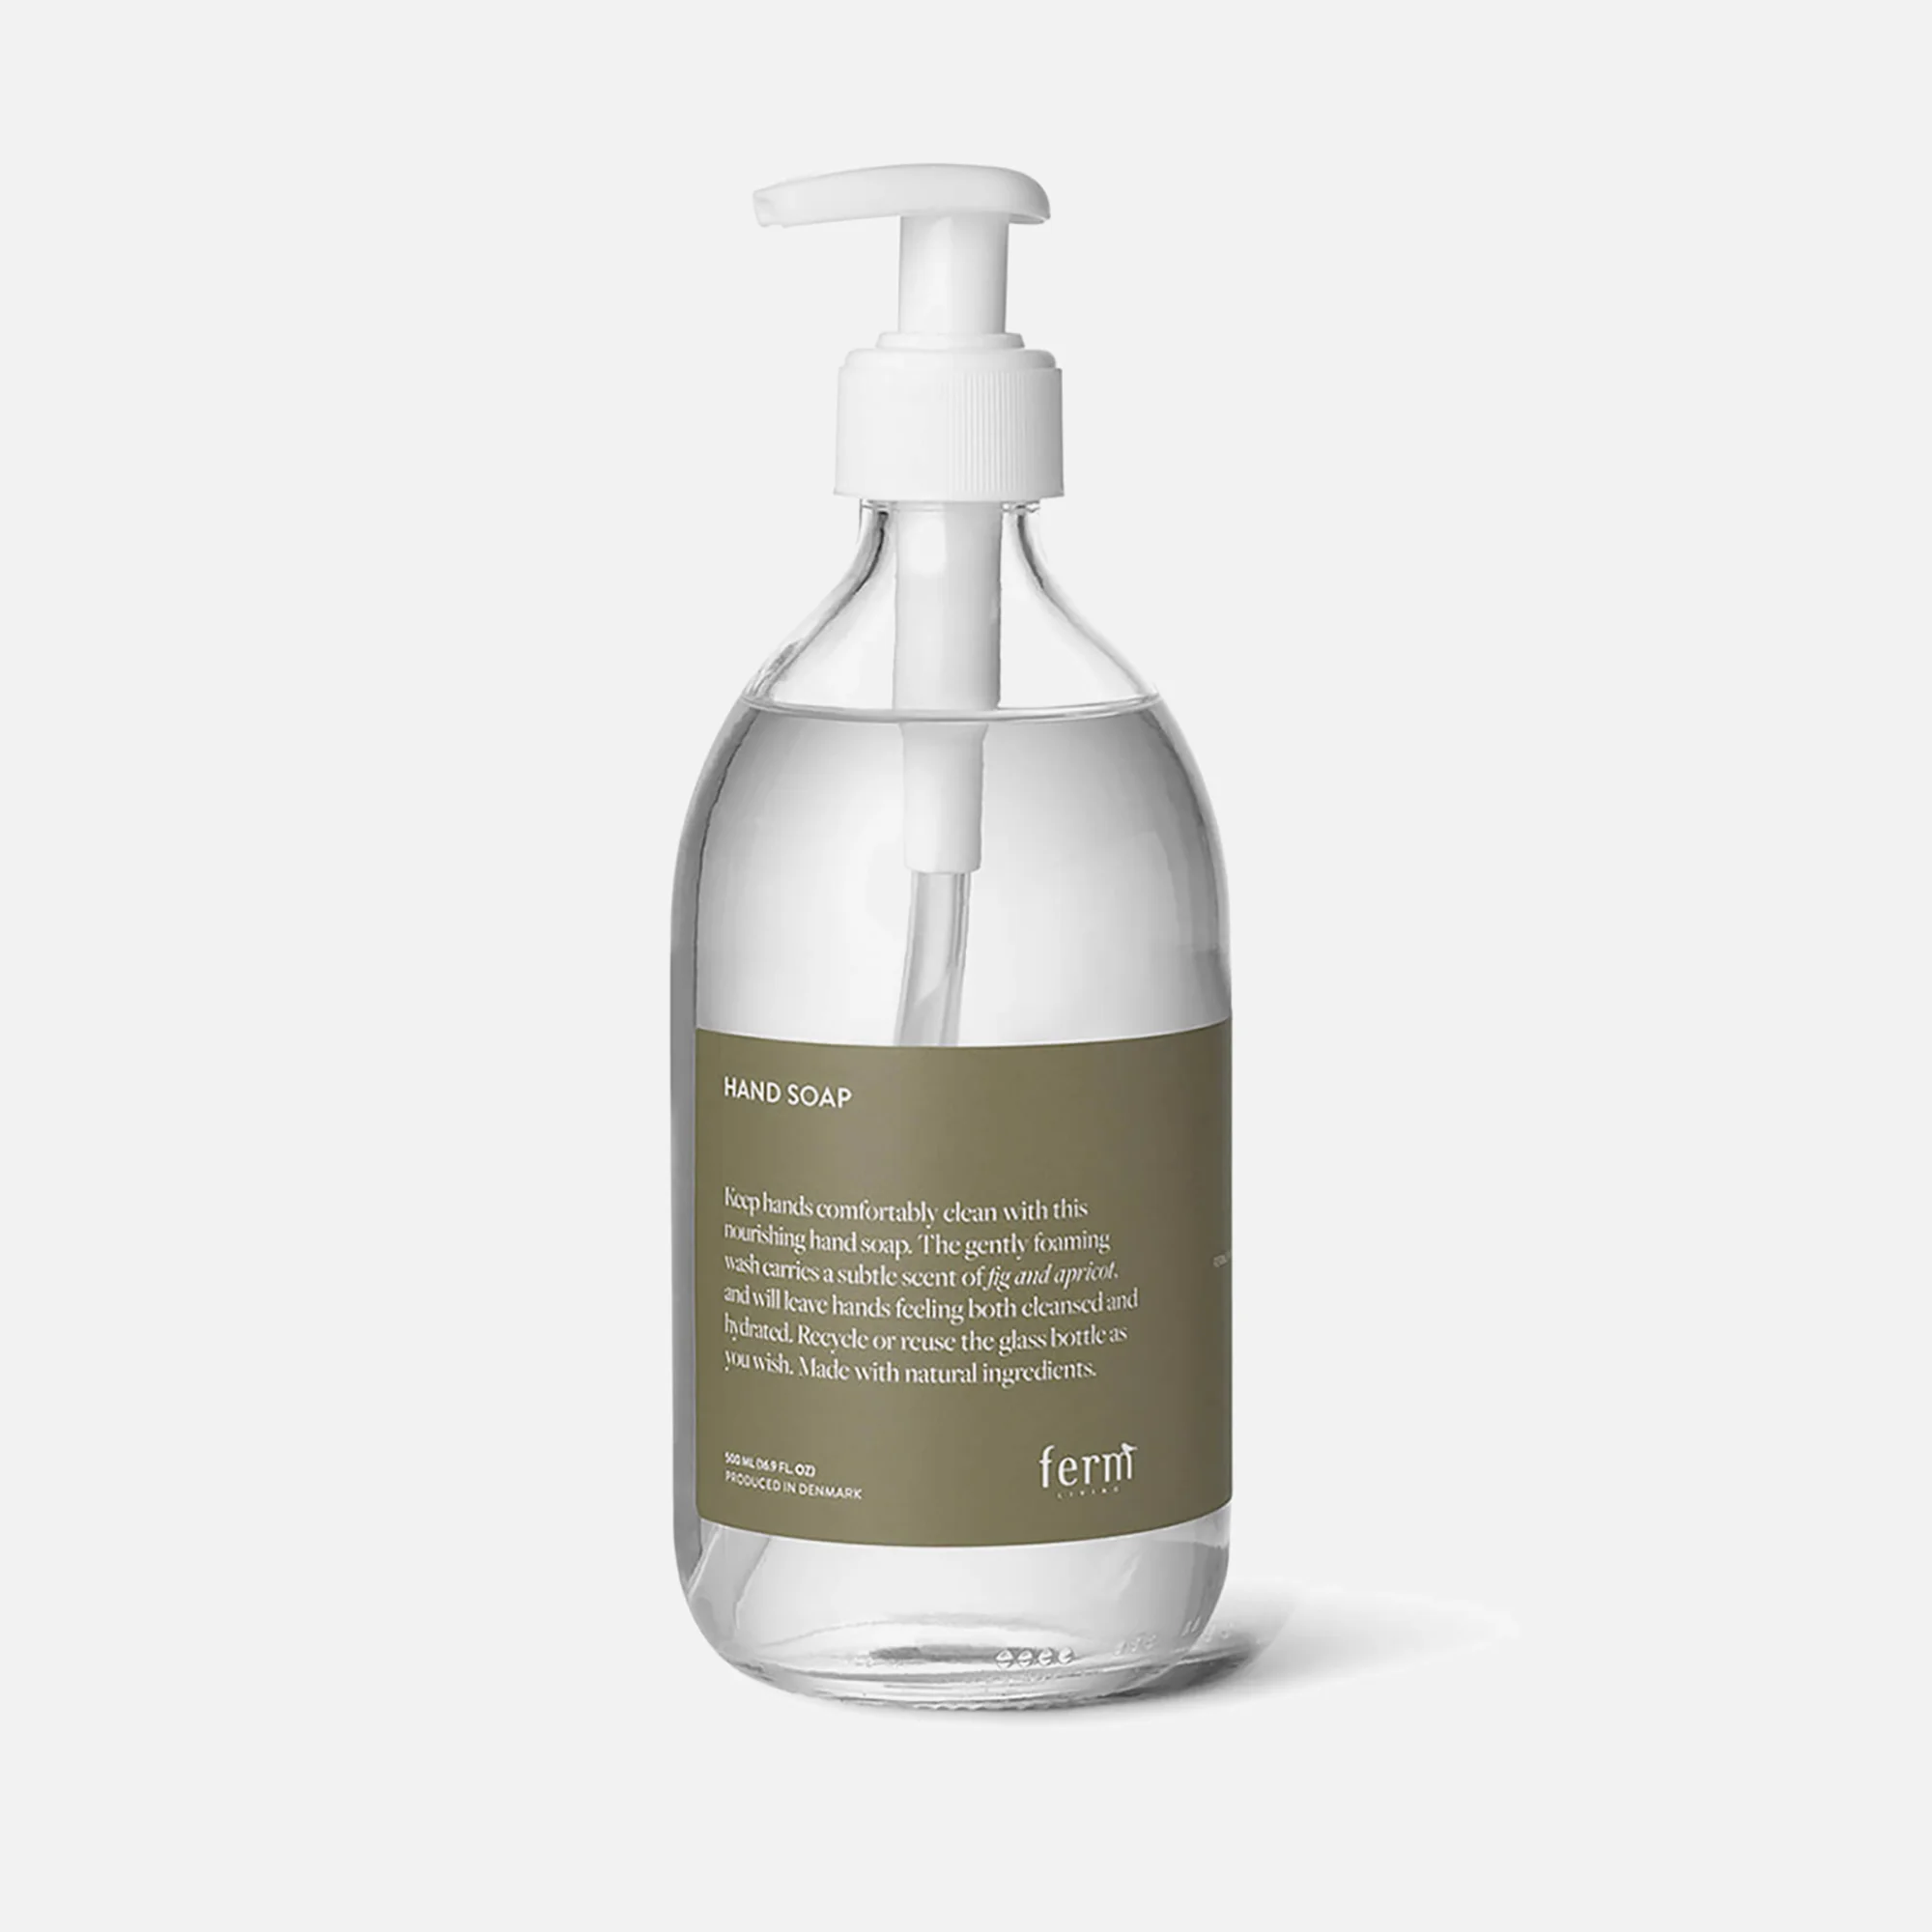 Ferm Living Hand Soap - Fig & Apricot Image 1